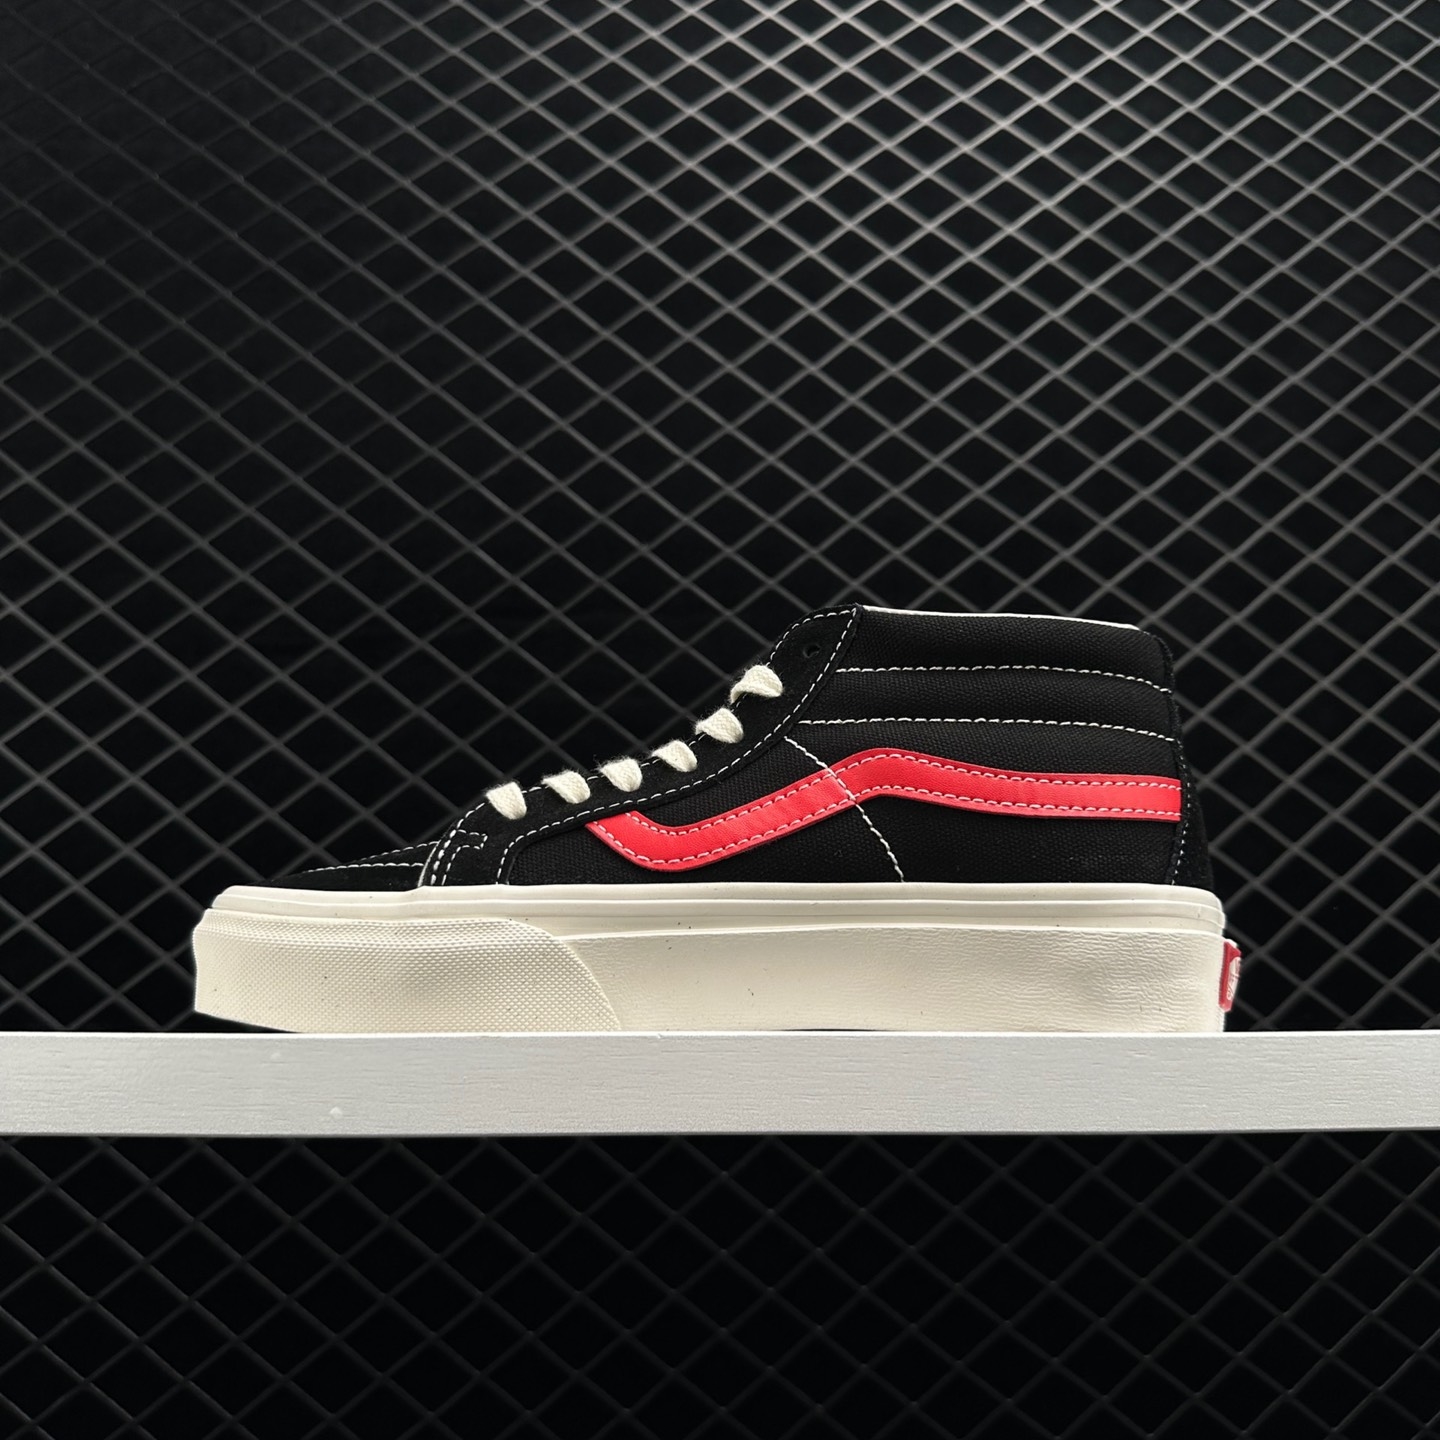 Vans SK8-Mid Black-Red 'Black Red' VN0A391FTP2 - Trendy Black and Red Mid-Top Sneakers